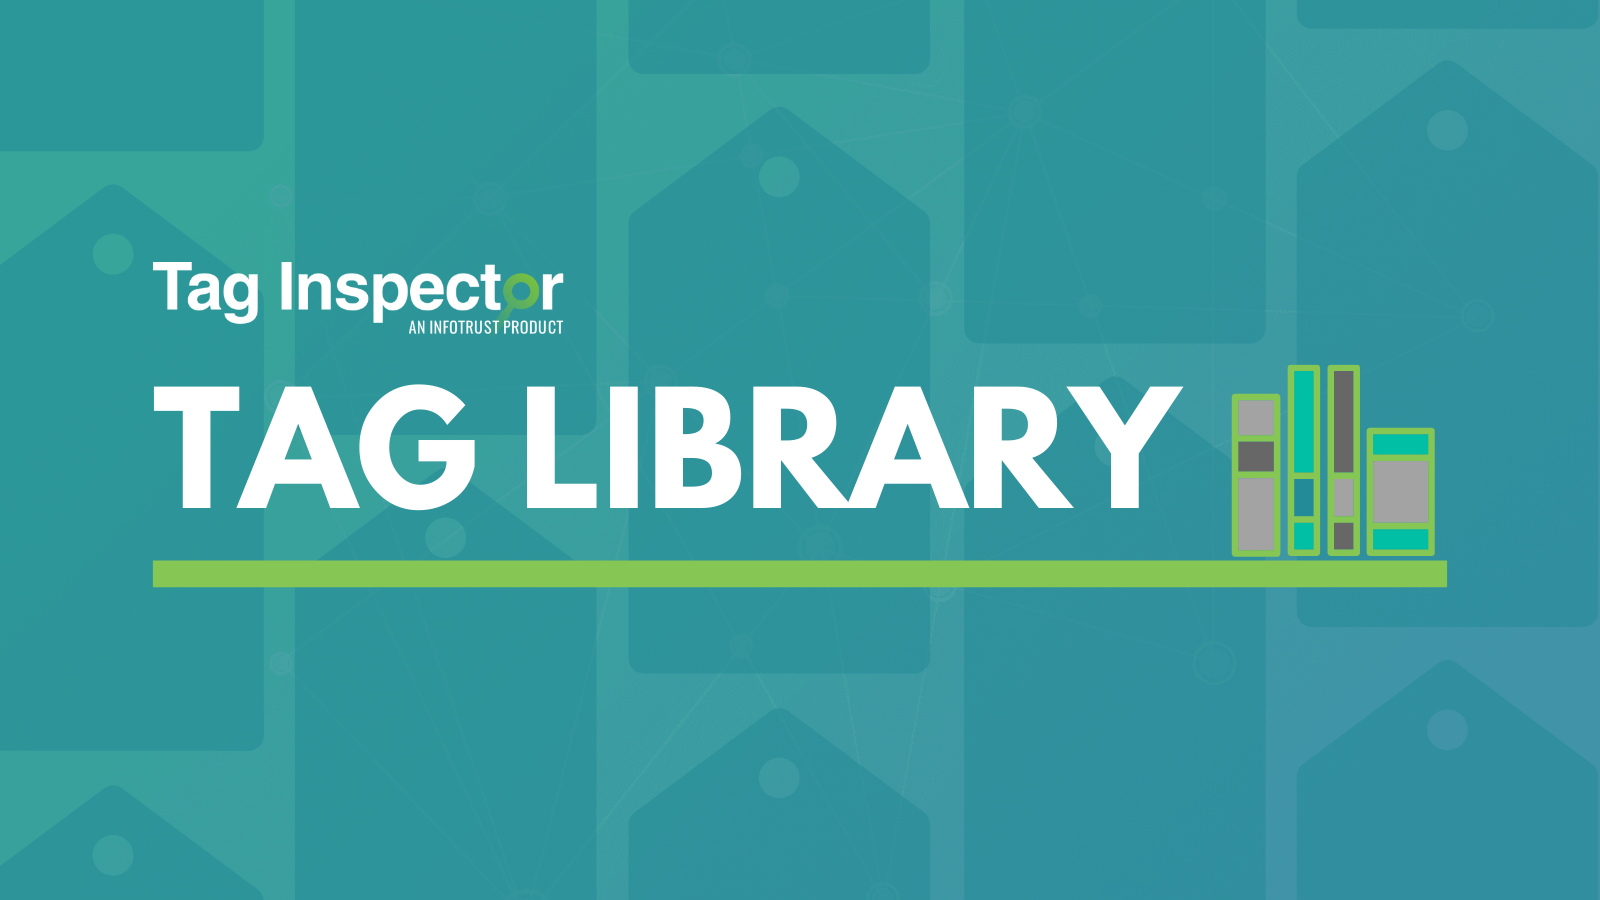 Tag Inspector extensive tag library